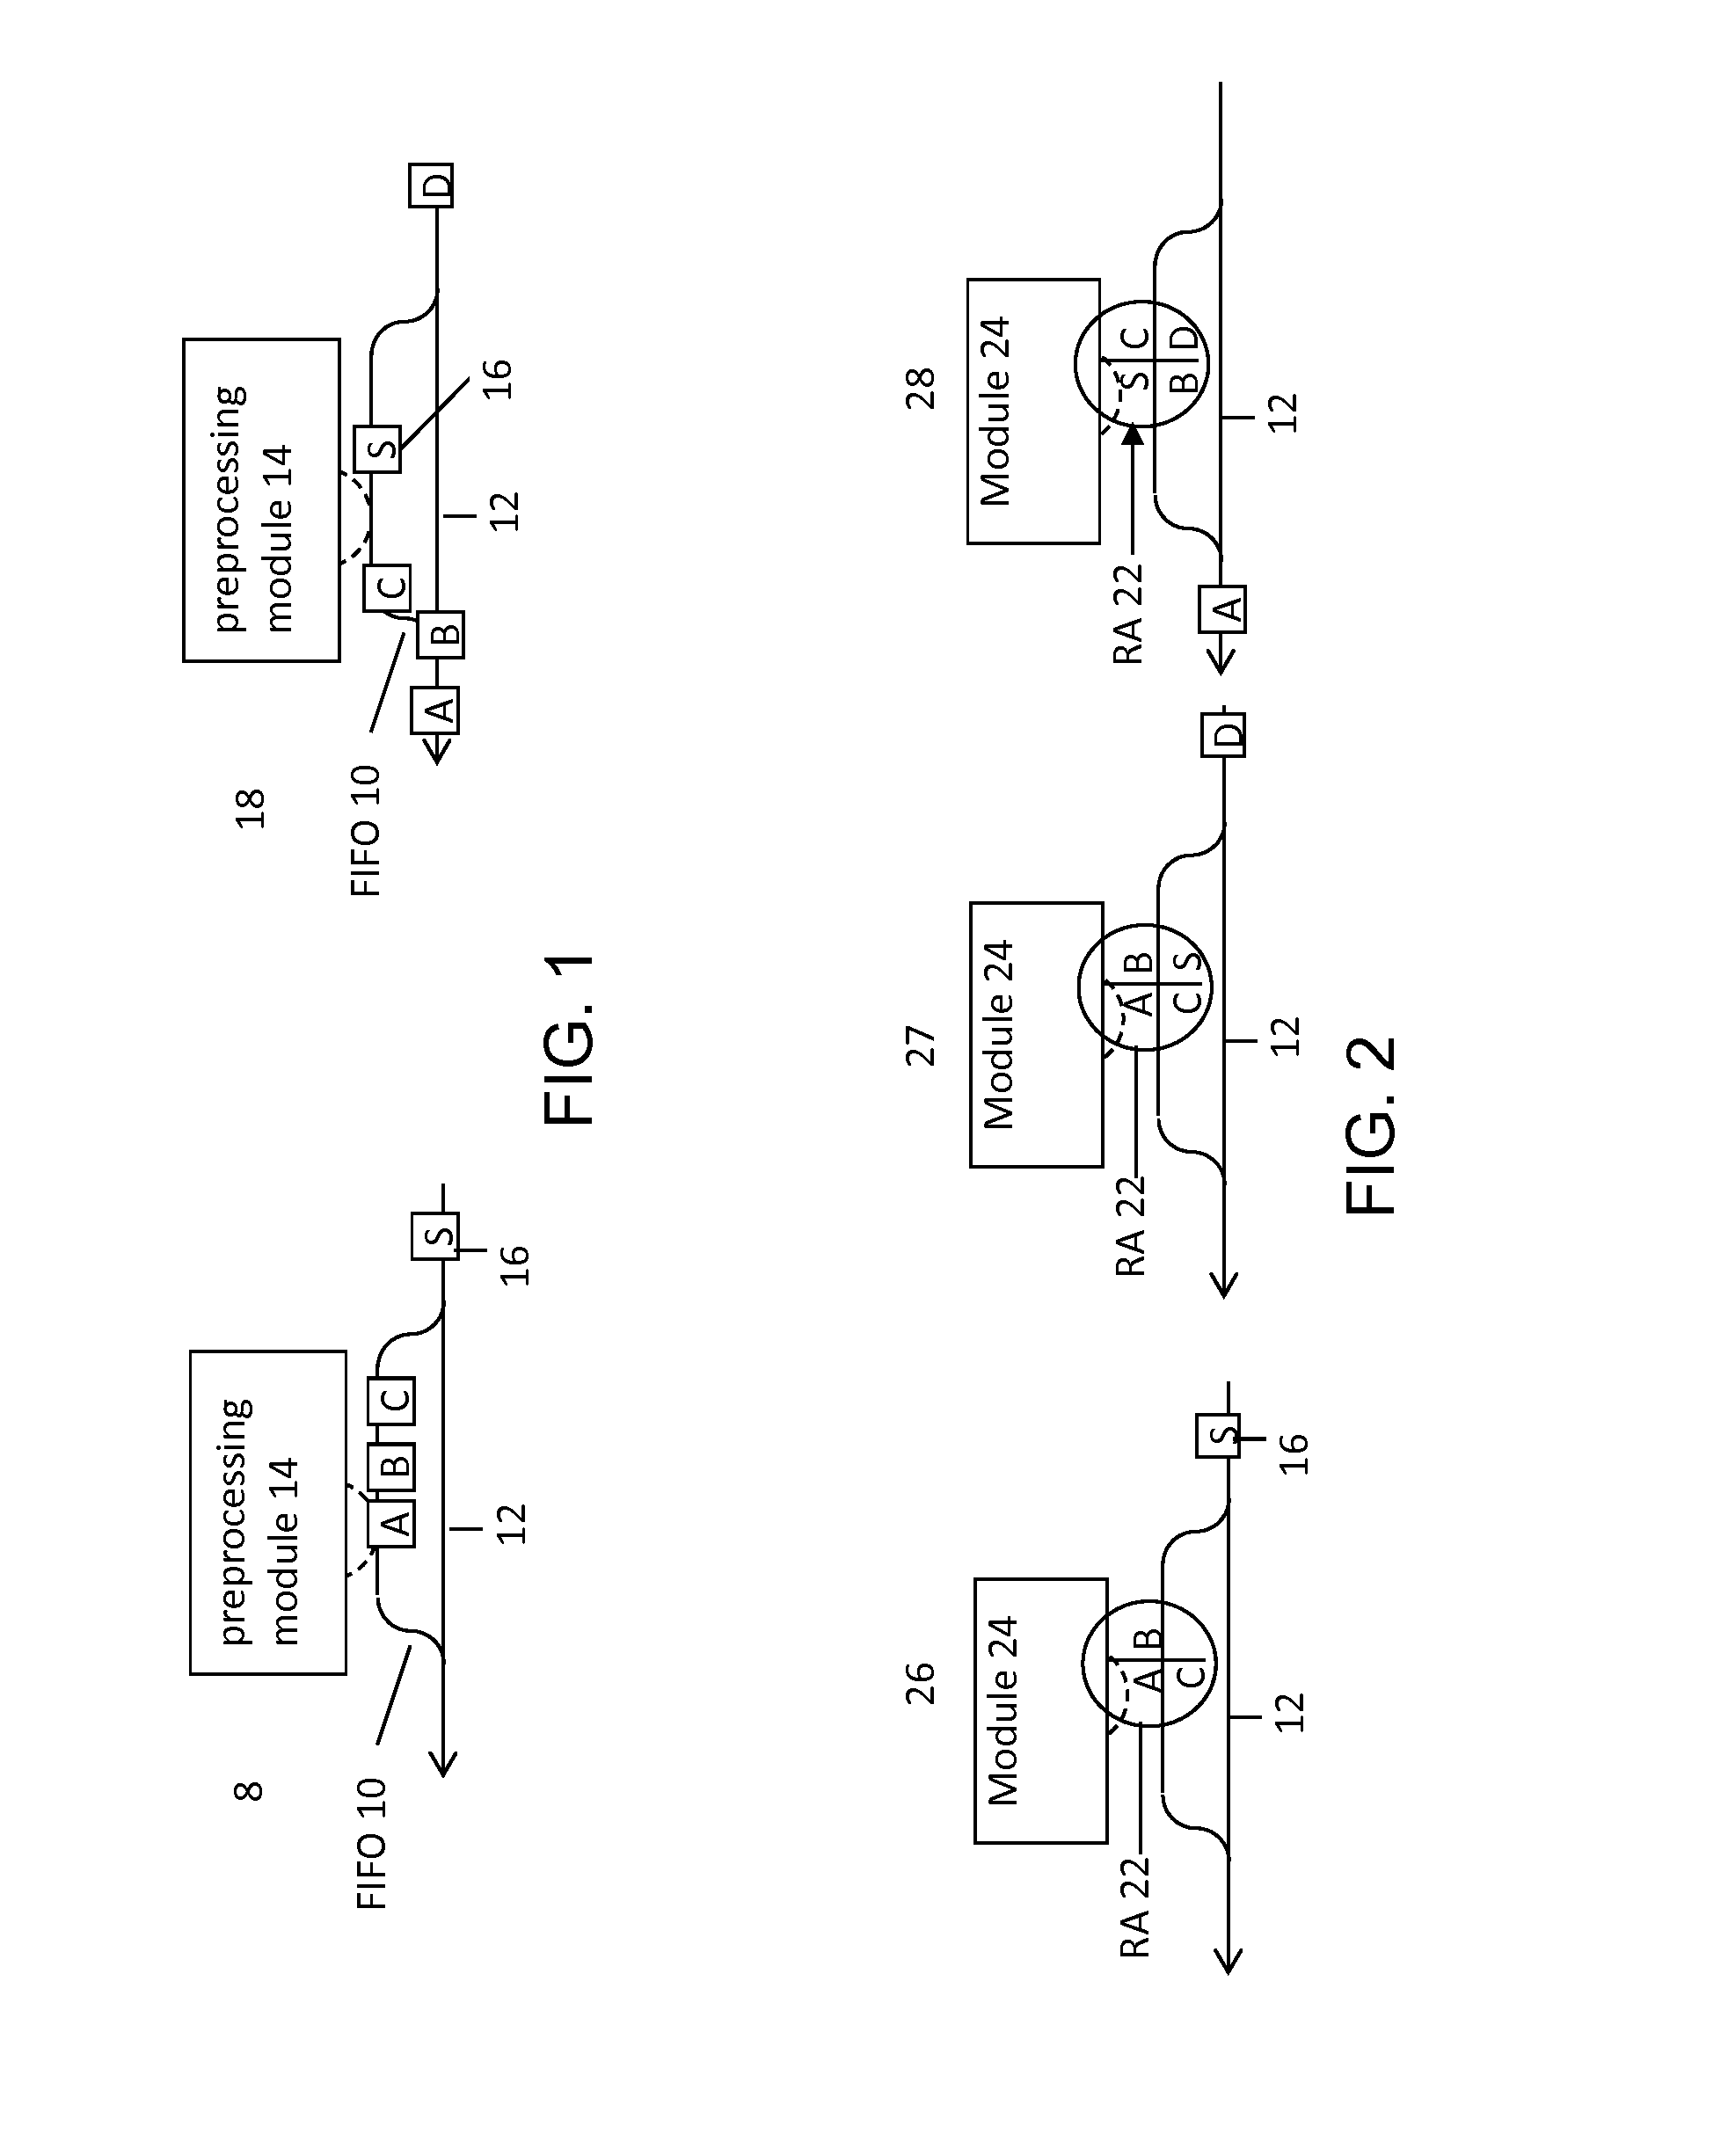 Method for processing priority samples that preserves a FIFO processing queue